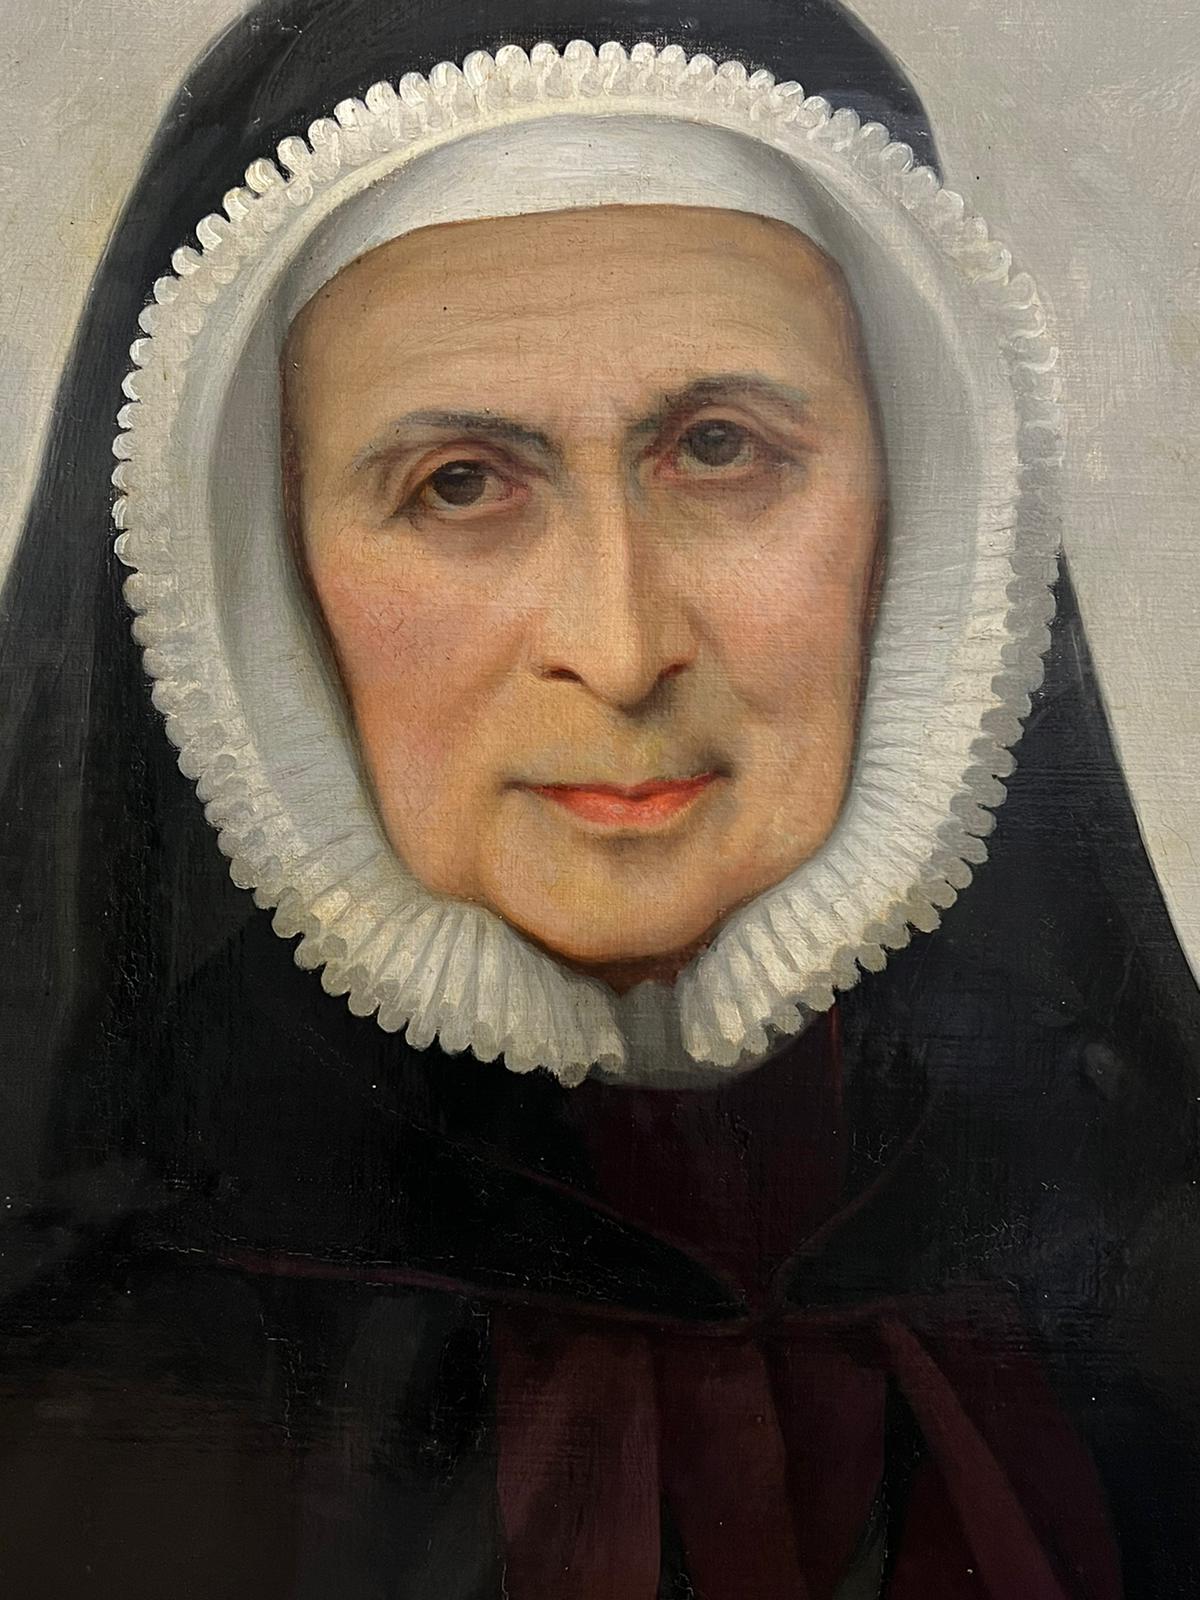 Portrait of a Nun
by Joseph Albert, signed and dated to the back, 1898
oil painting on canvas, unframed
canvas: 24 x 18 inches
provenance: private collection, England 
condition: overall very good and presentable